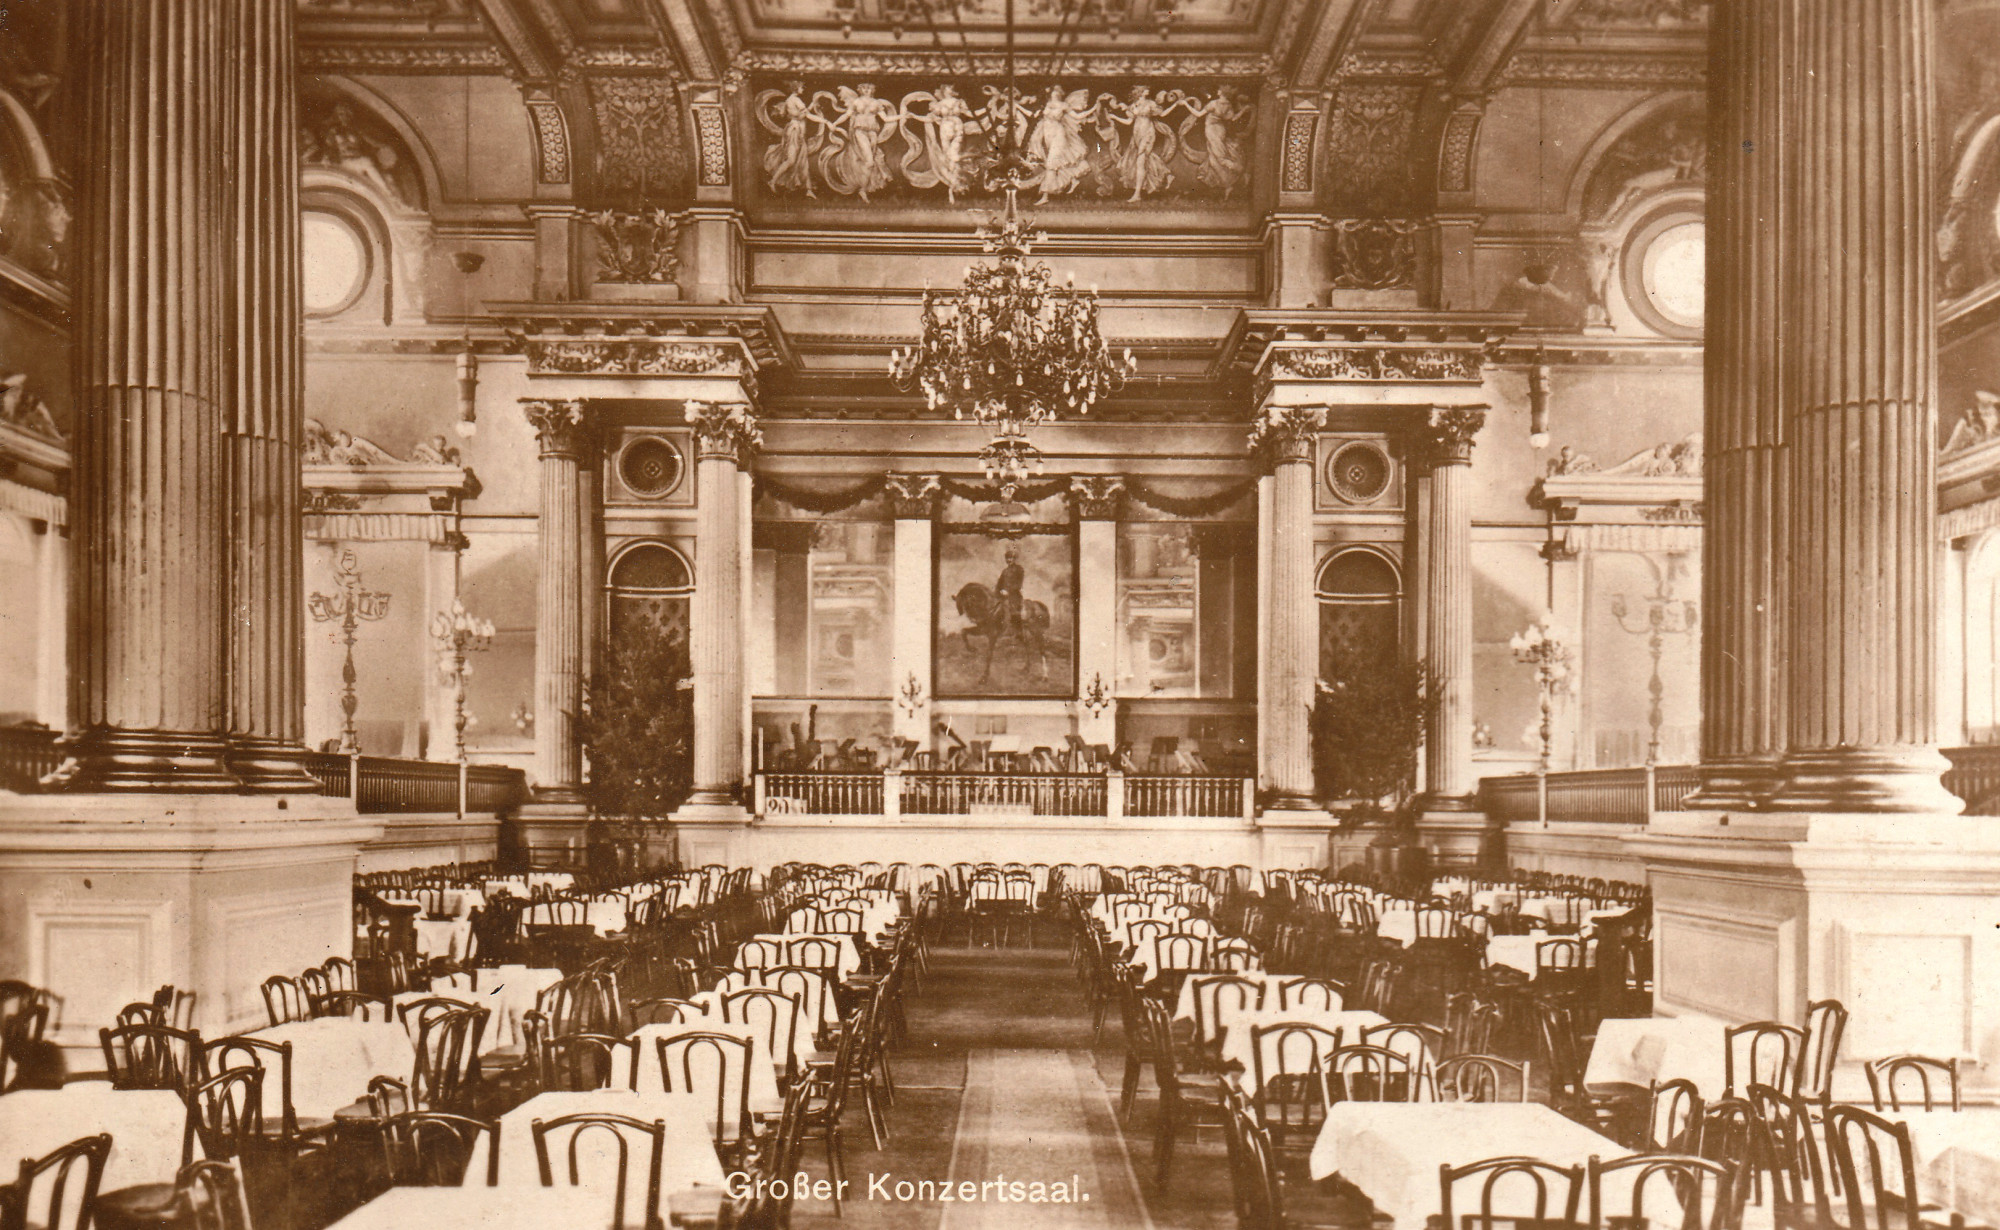 A large, magnificently designed hall with numerous chairs and tables decked in white. The hall reveals various styles, including ornamental ceiling and wall decorations, but also classicist elements such as fluted columns, round windows, and figural patterns. Beneath a giant painting at the end of the hall is a stage with a small balustrade.